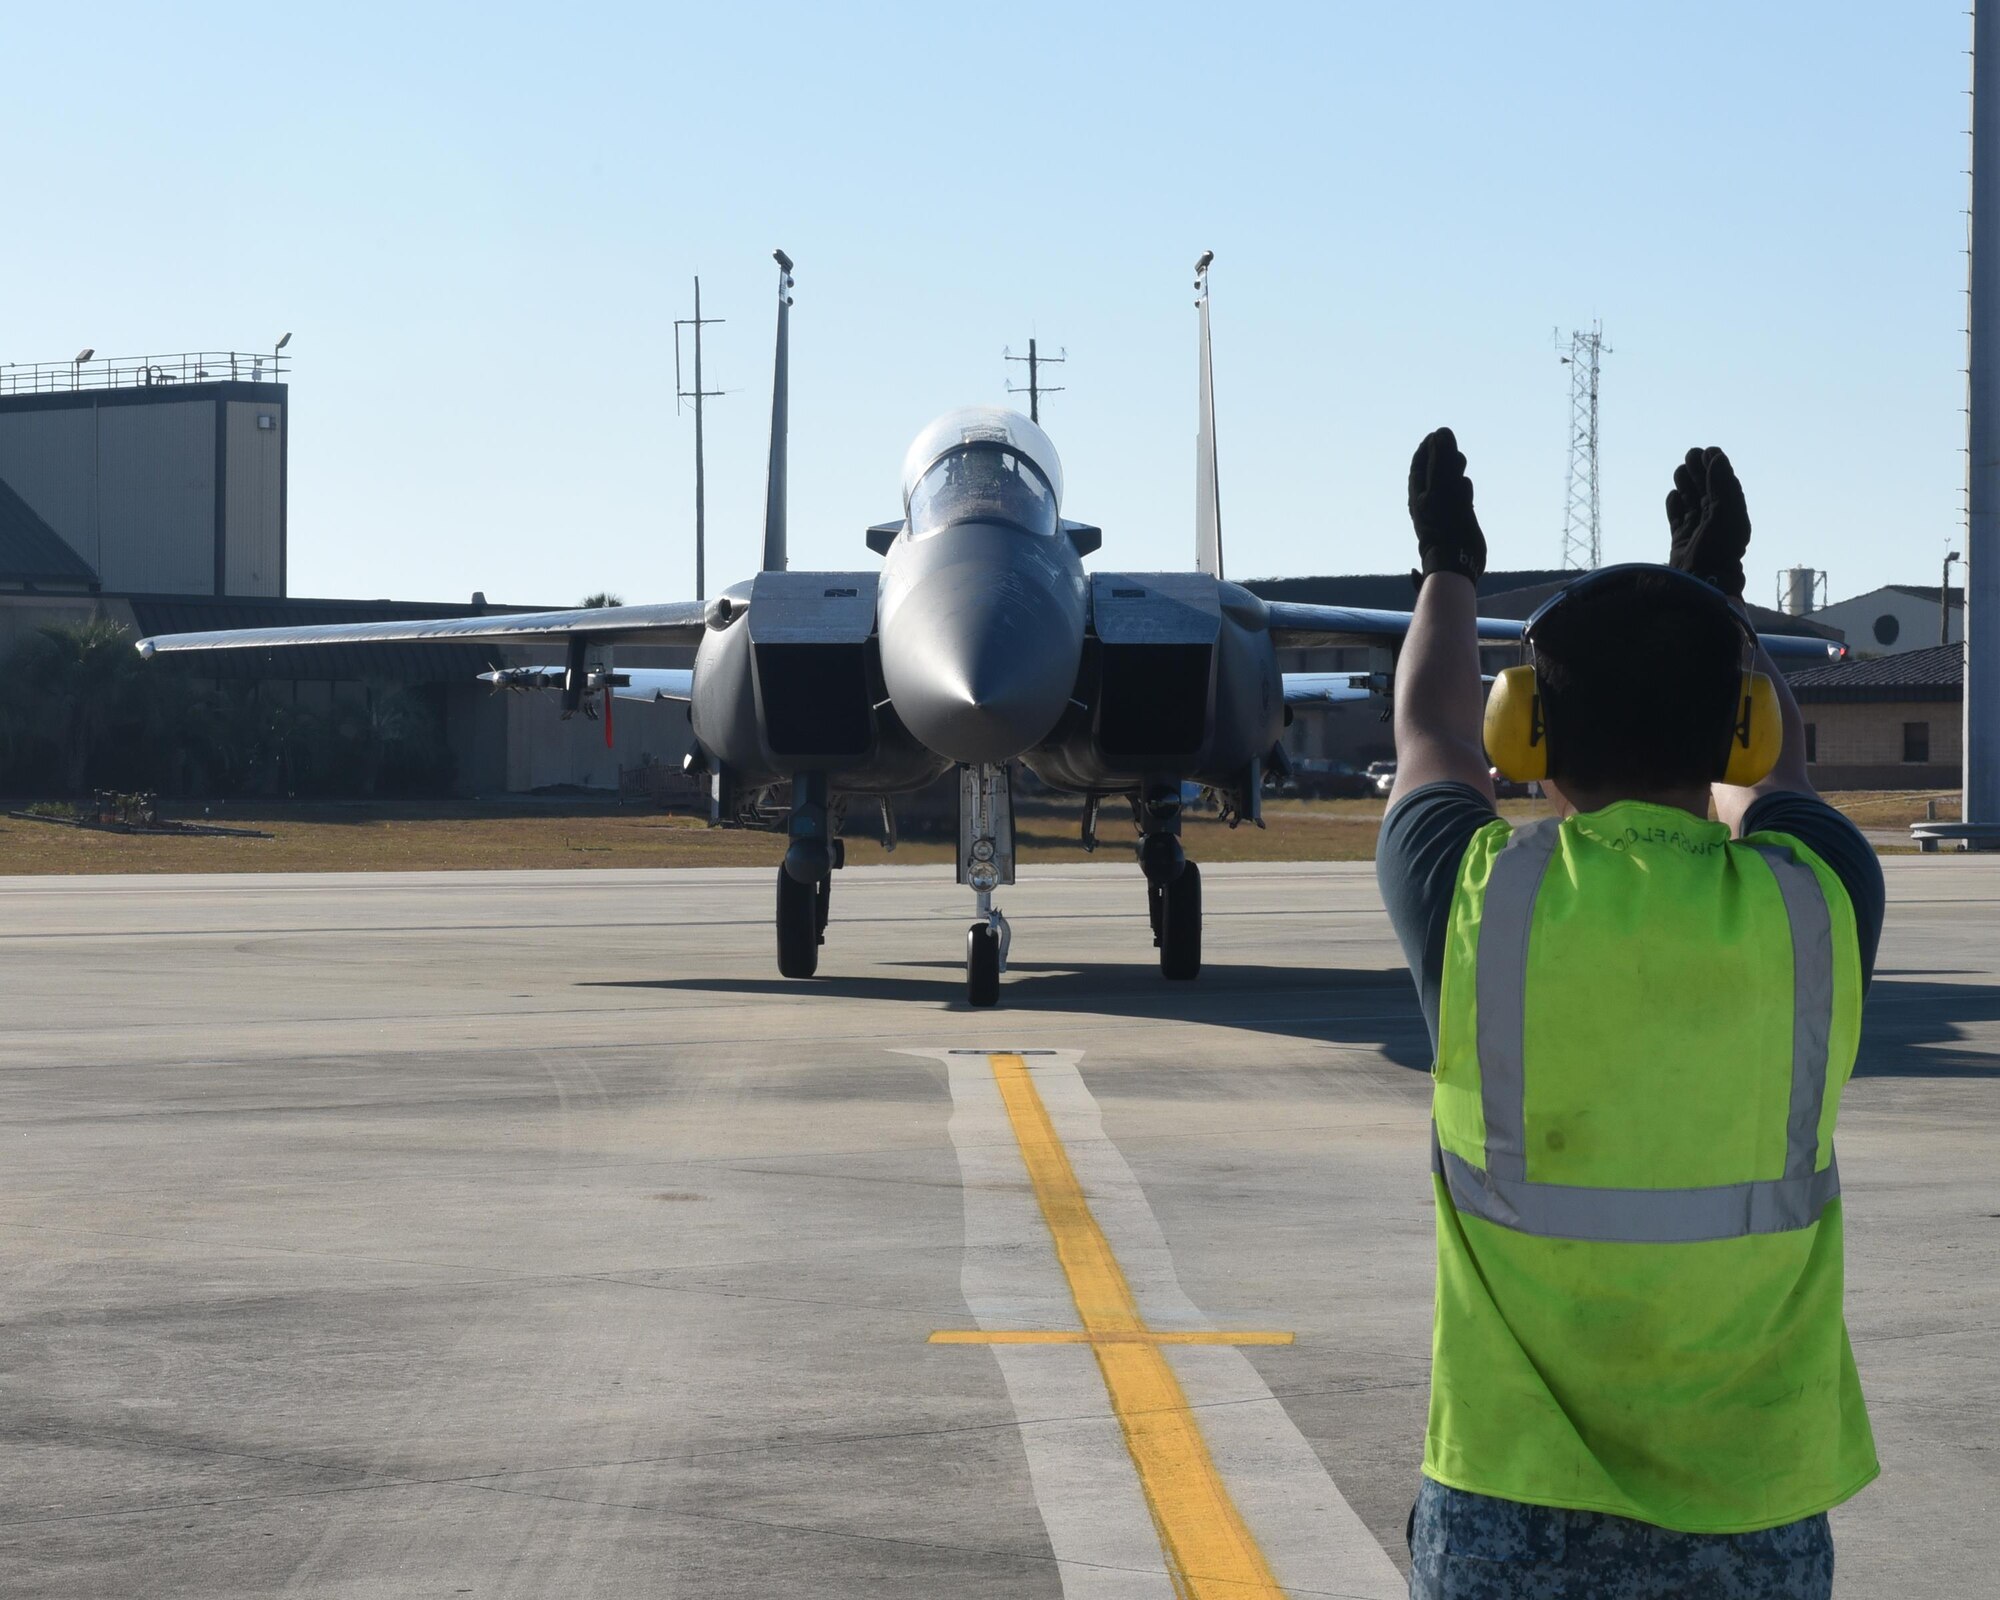 A Singapore air force crew chief marshals an F-15 Eagle from the 428th Fighter Squadron, Mountain Home Air Force Base, Idaho, into a parked position after a training flight at Tyndall Air Force Base, Fla., Nov. 17, 2016. Singaporean pilots from squadrons at Mountain Home AFB and Luke AFB, Ariz., came to Tyndall to participate in live-fire exercises with their U.S. counterparts. (U.S. Air Force photo by Airman 1st Class Cody R. Miller/Released) 